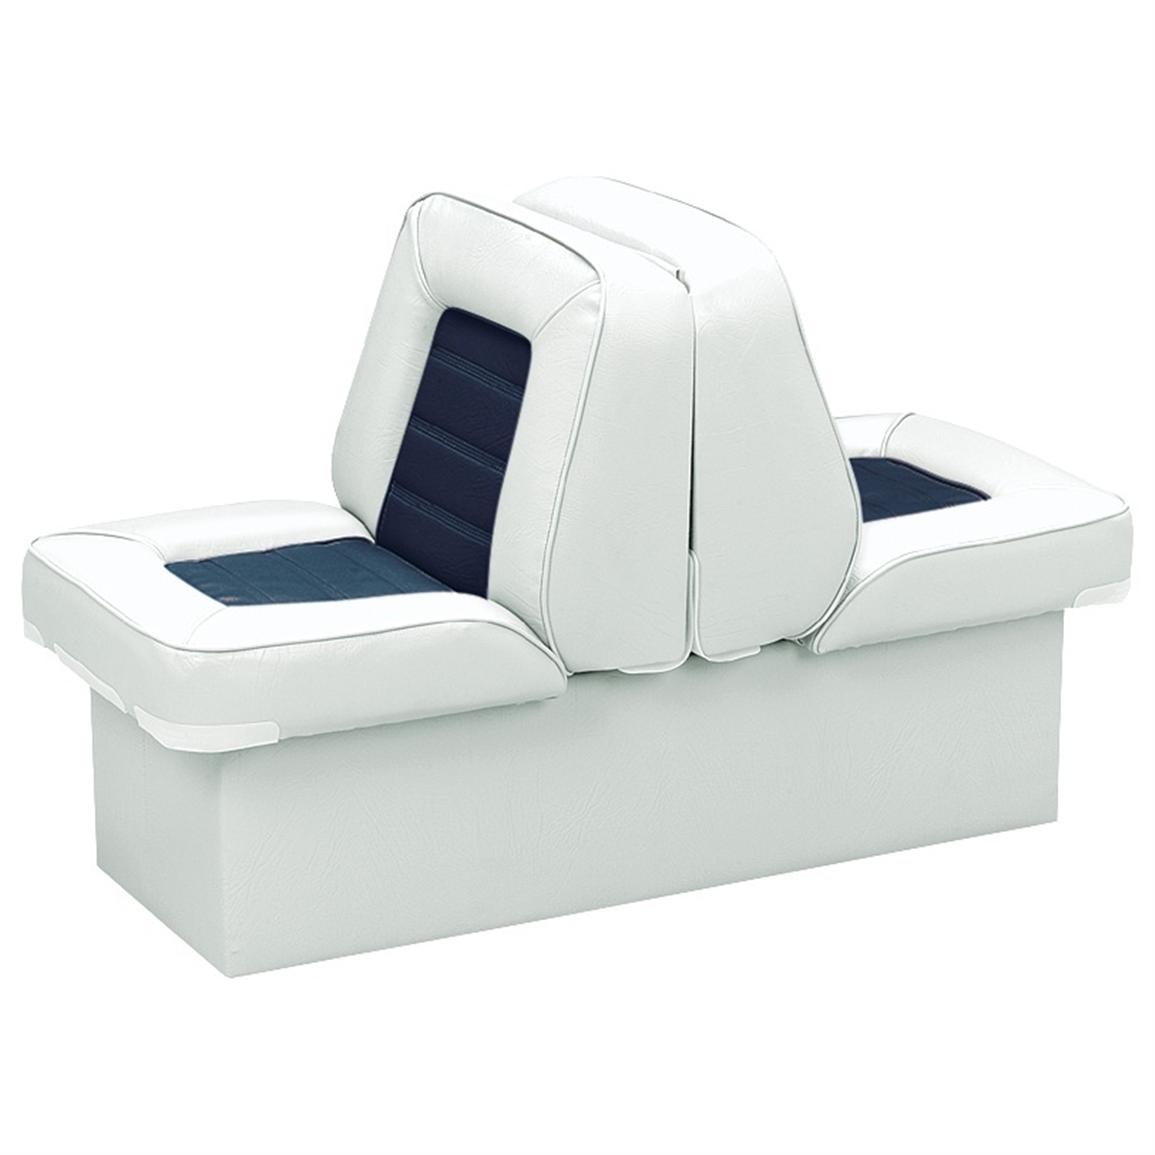  Boating / Boat Seats / Fold Down Seats / Wise Deluxe Boat Lounge Seat